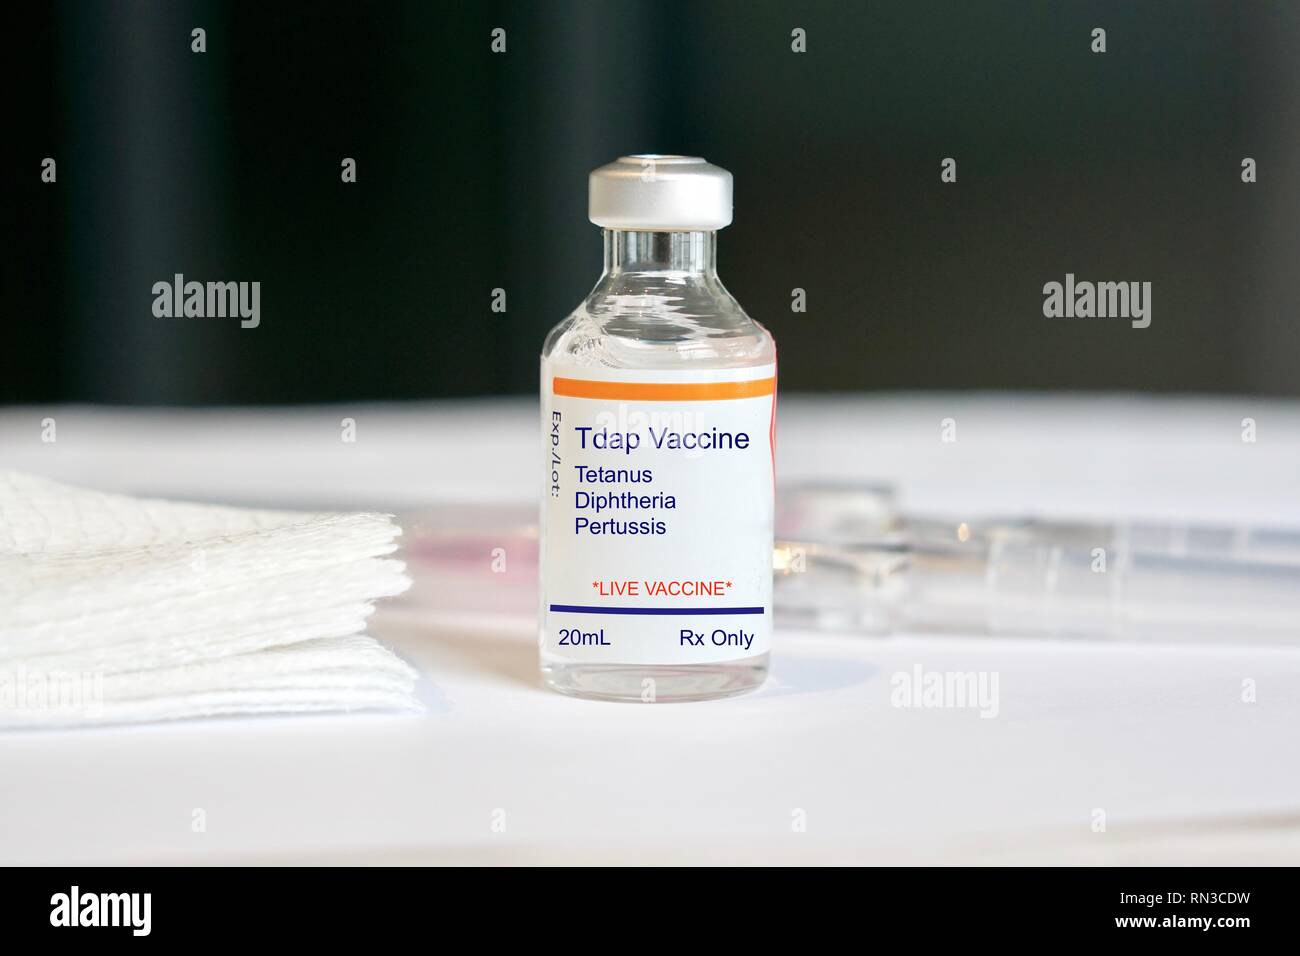 Tdap Vaccine for tetanus, diphtheria, and pertussis in a glass vial in a medical setting Stock Photo